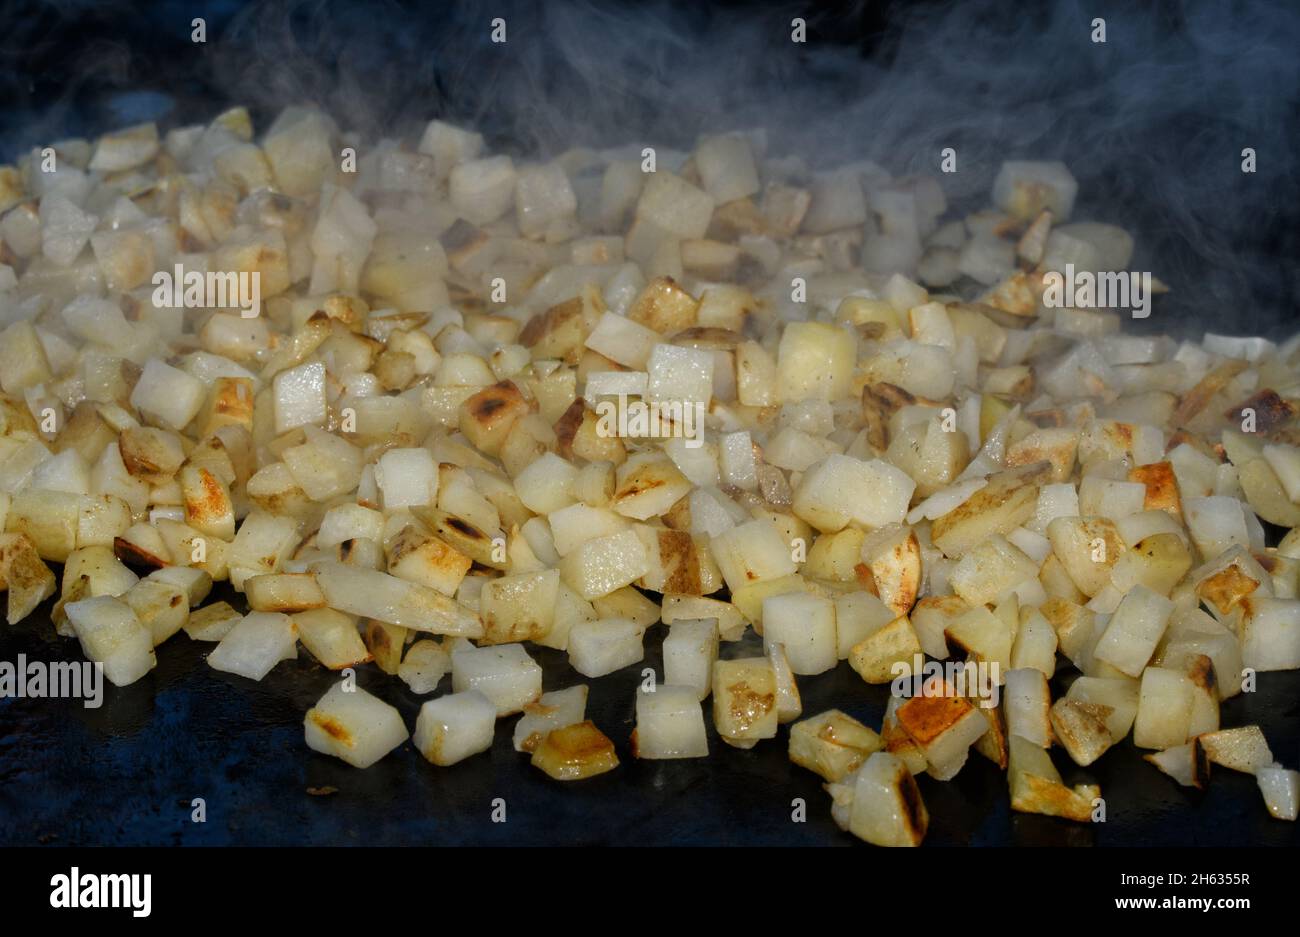 Hash browns being cooked on a griddle, with steam rising from the small cubed potatoes Stock Photo